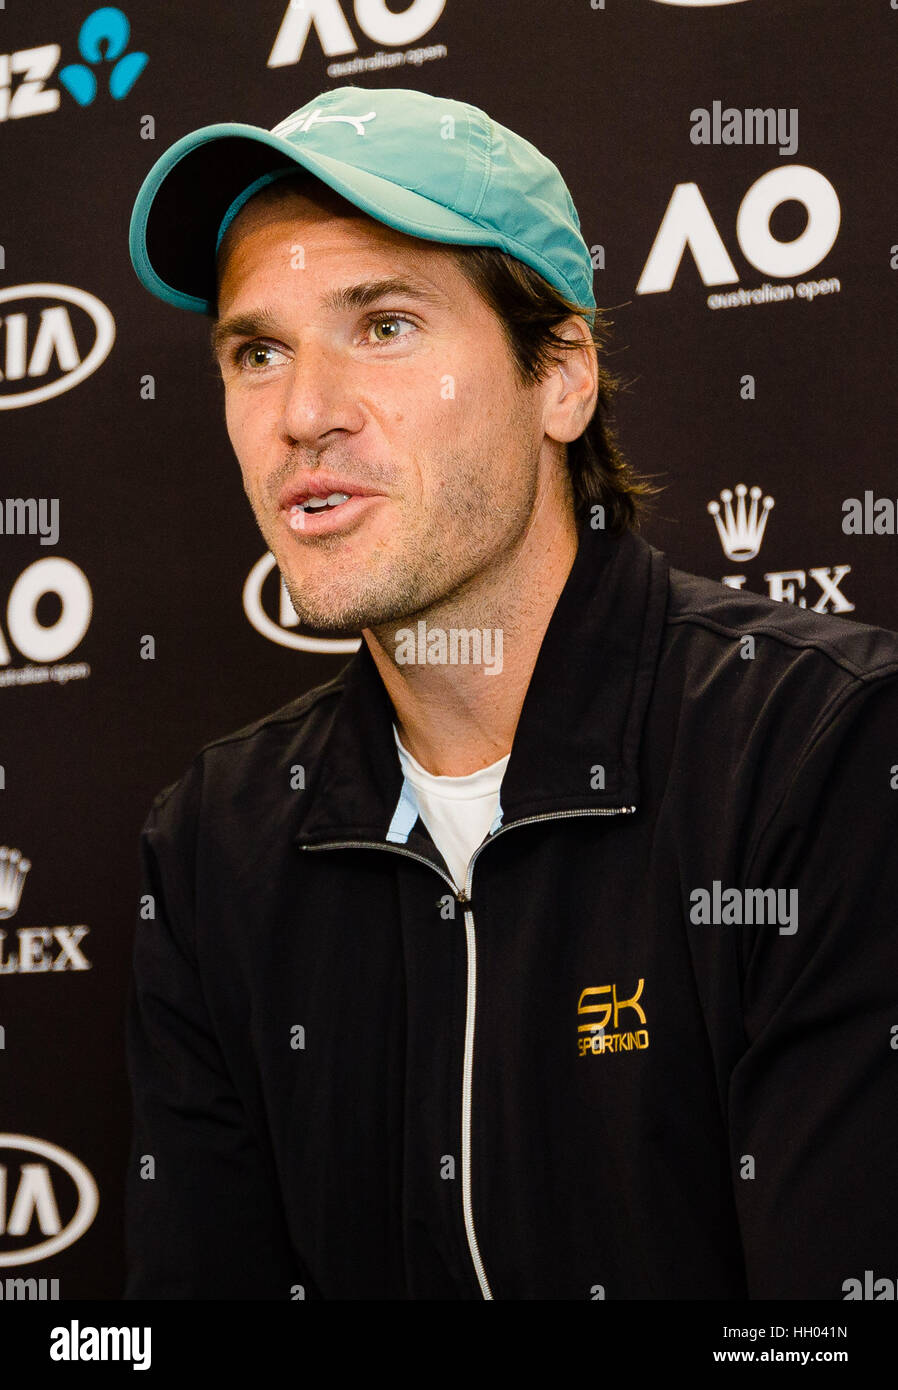 Melbourne, Australia. 15th January 2017. Tommy Haas of Germany speaks during a press conference before the start of the 2017 Australian Open at Melbourne Park in Melbourne, Australia. Credit: Frank Molter/Alamy Live News Stock Photo